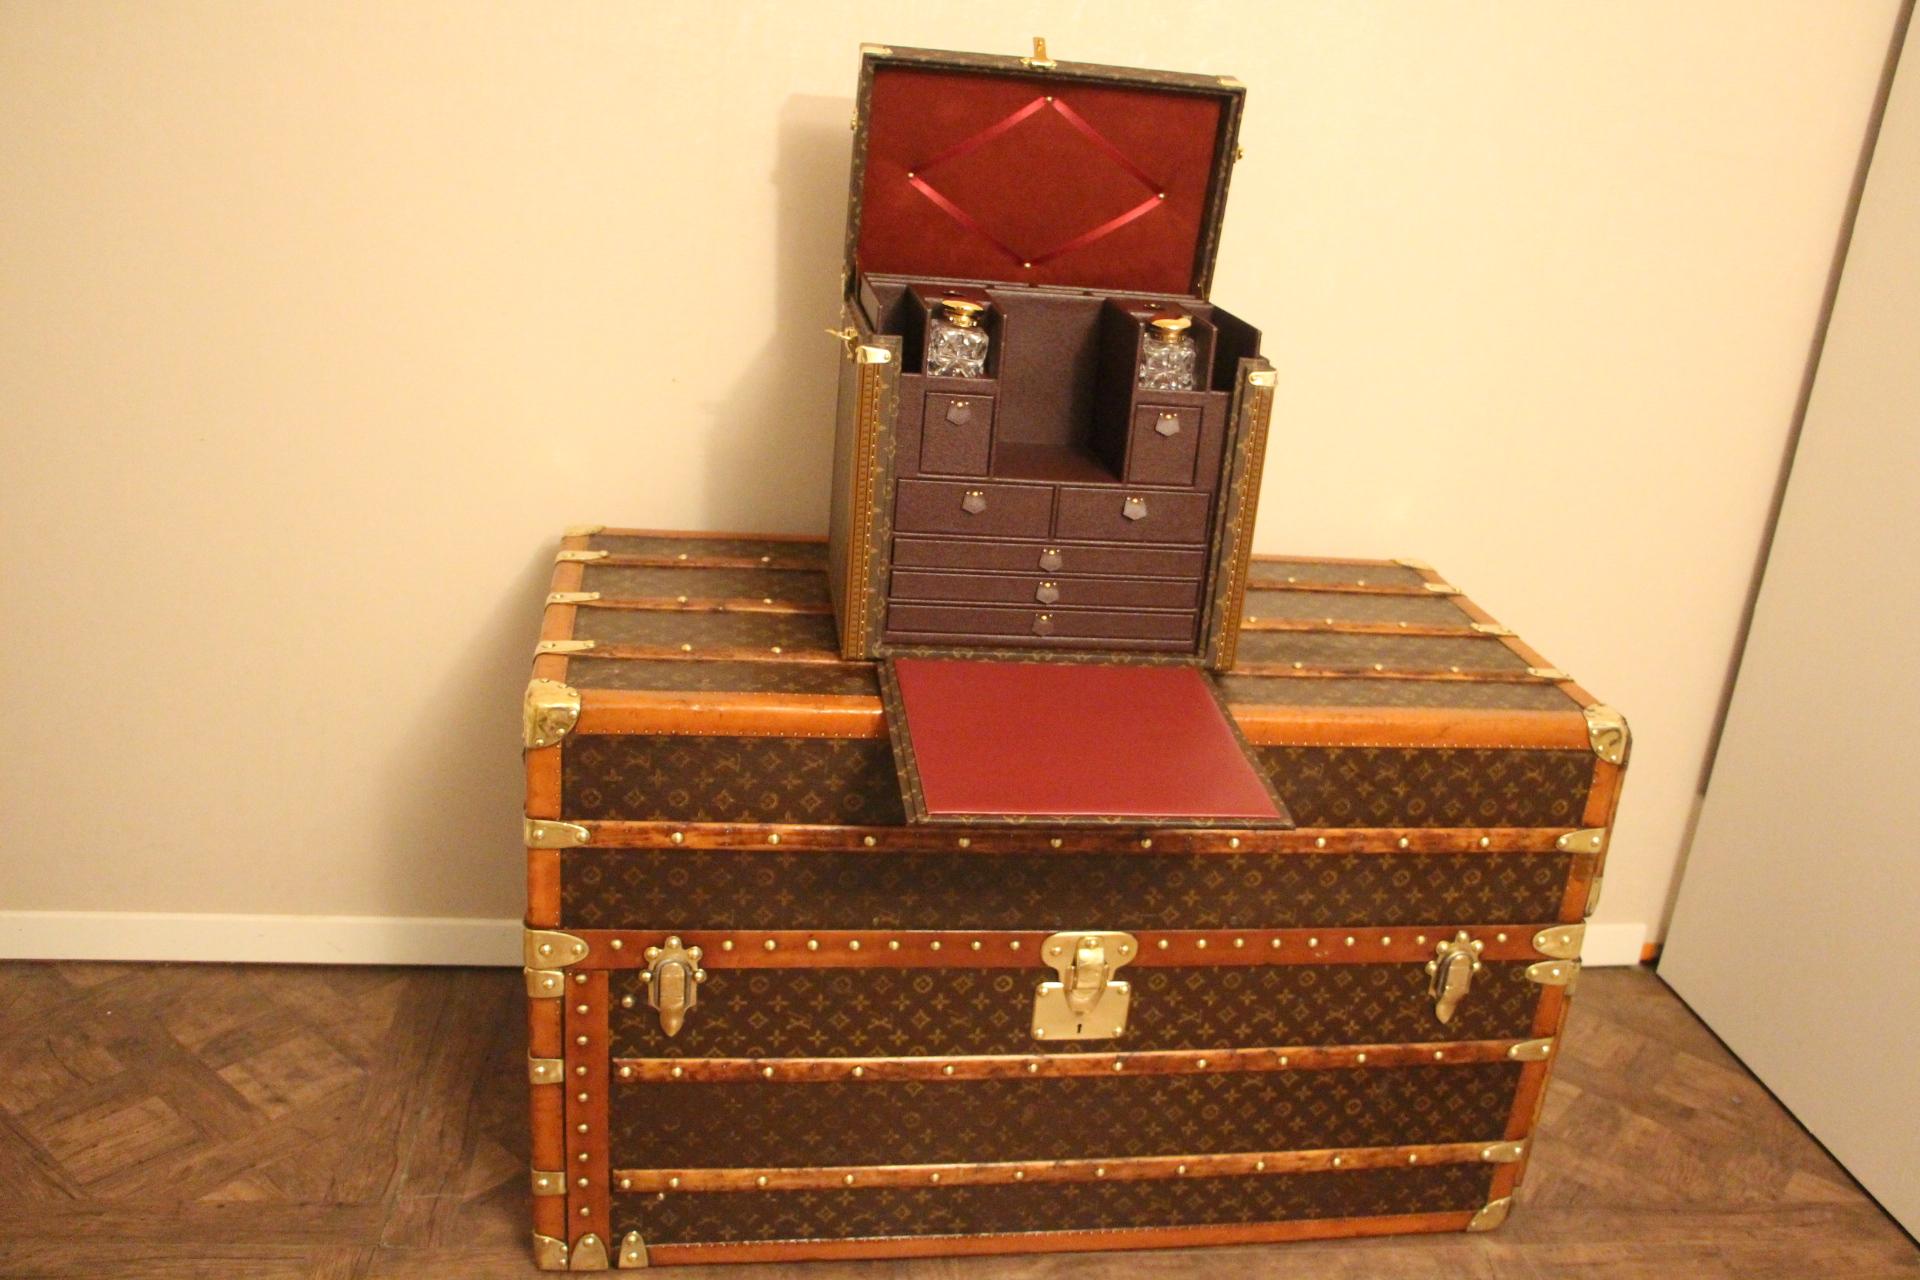 This magnificent Louis Vuitton trunk features monogram canvas, lozine trim, solid brass lock, cowhide leather top handle with its name holder and its clochette hiding its 2 original working keys.
It opens vertically to reveal a breathtaking inside.